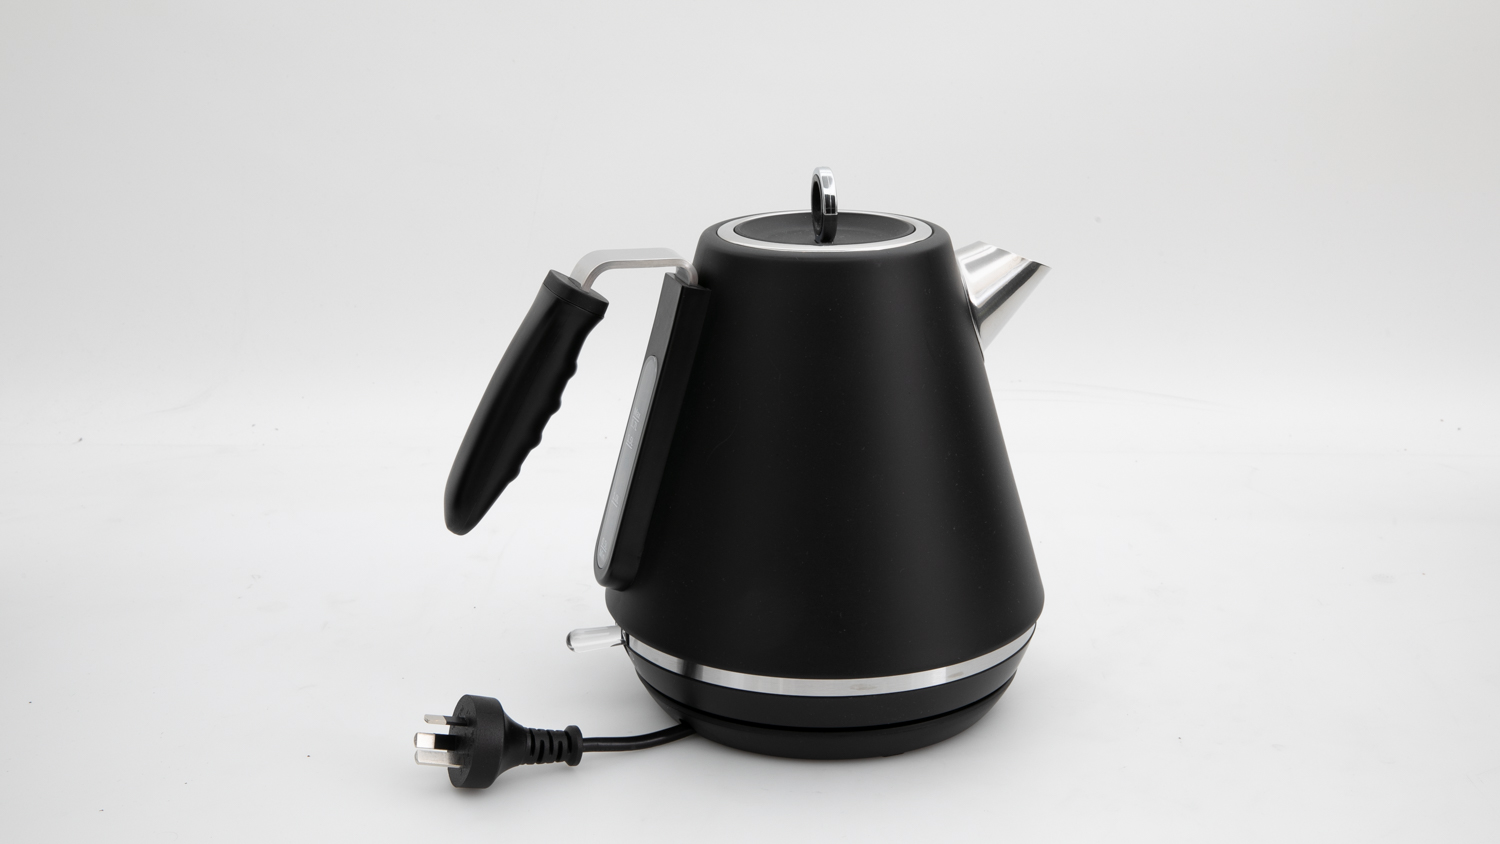 Kmart Australia launches a SMART kettle that you can turn on with